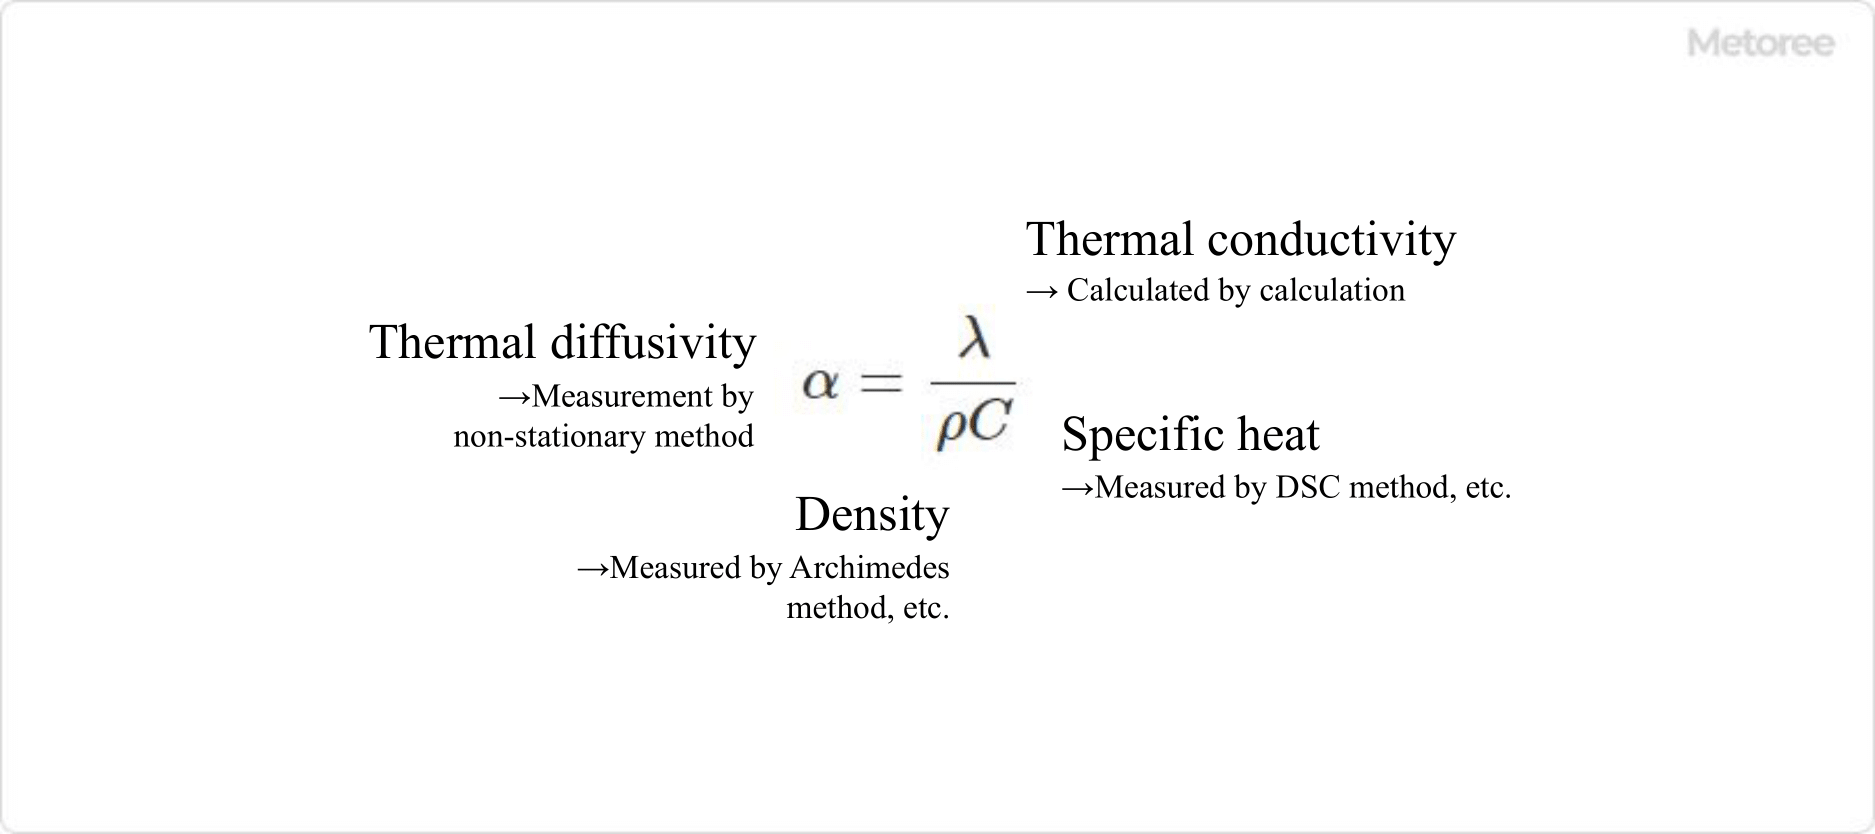 3806_Thermal-Conductivity-Analyzers_熱伝導率測定器-2.png